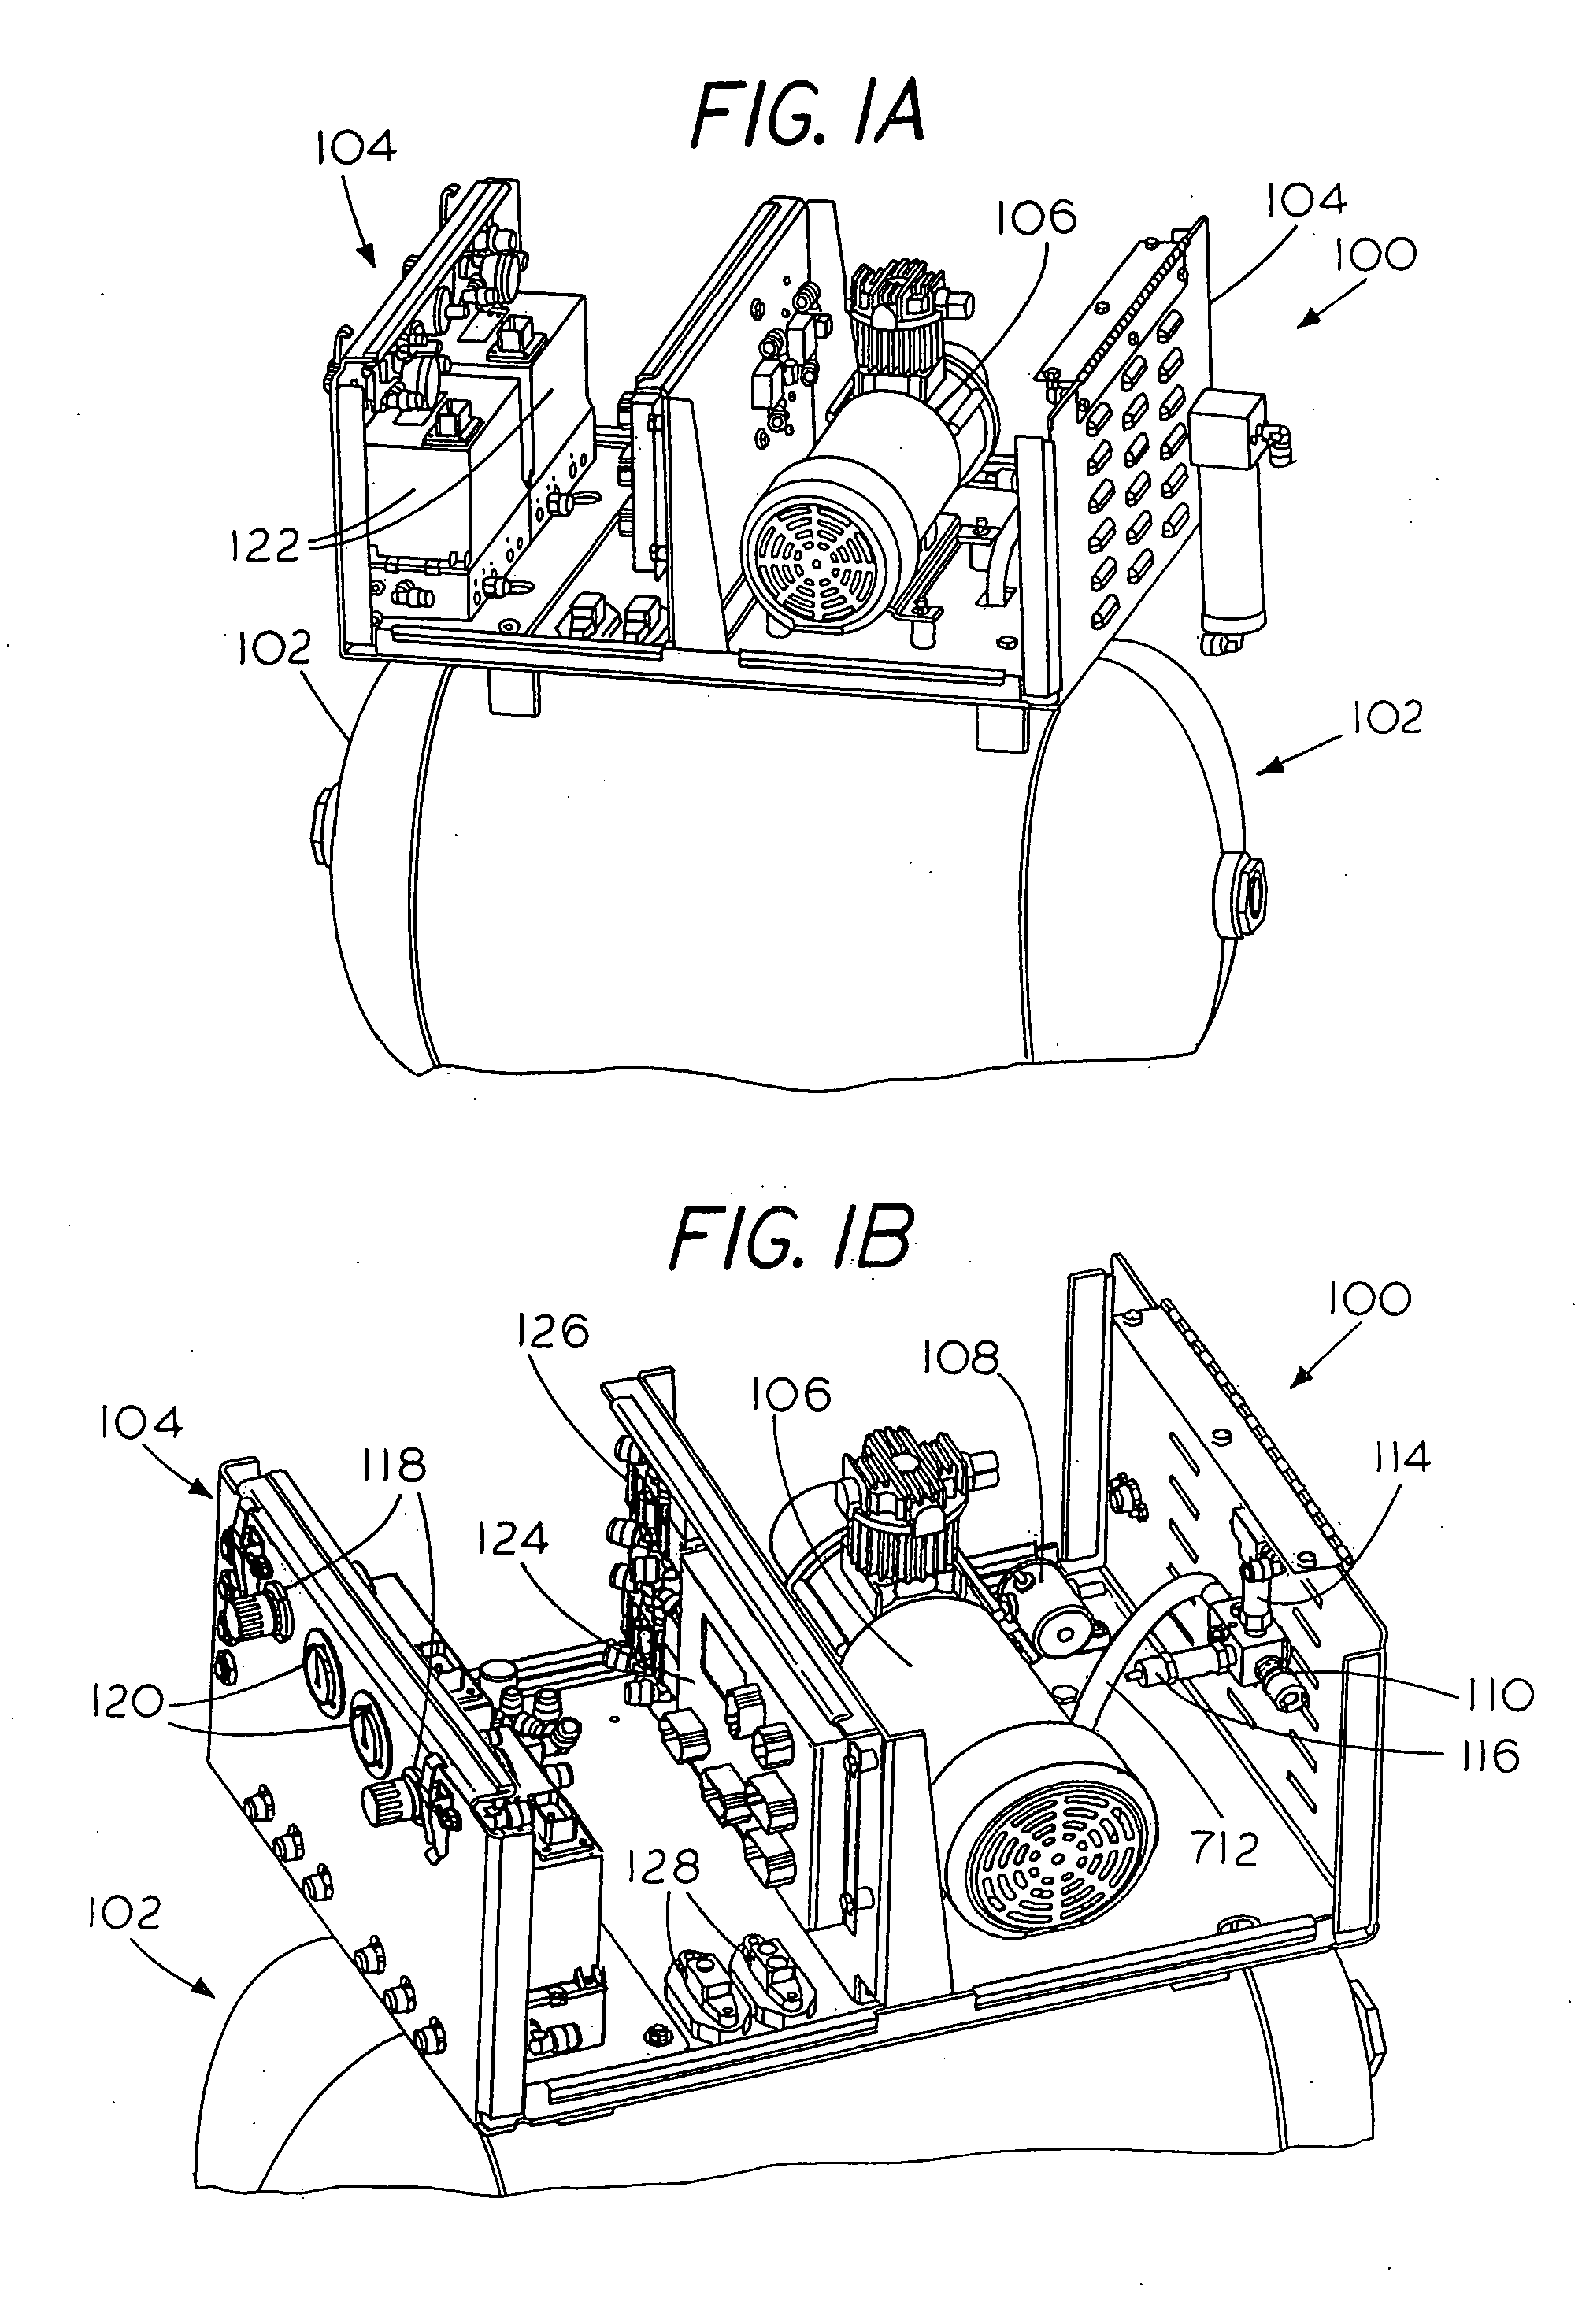 Pneumatic system for operating row treating units for multi-row agriculture implements